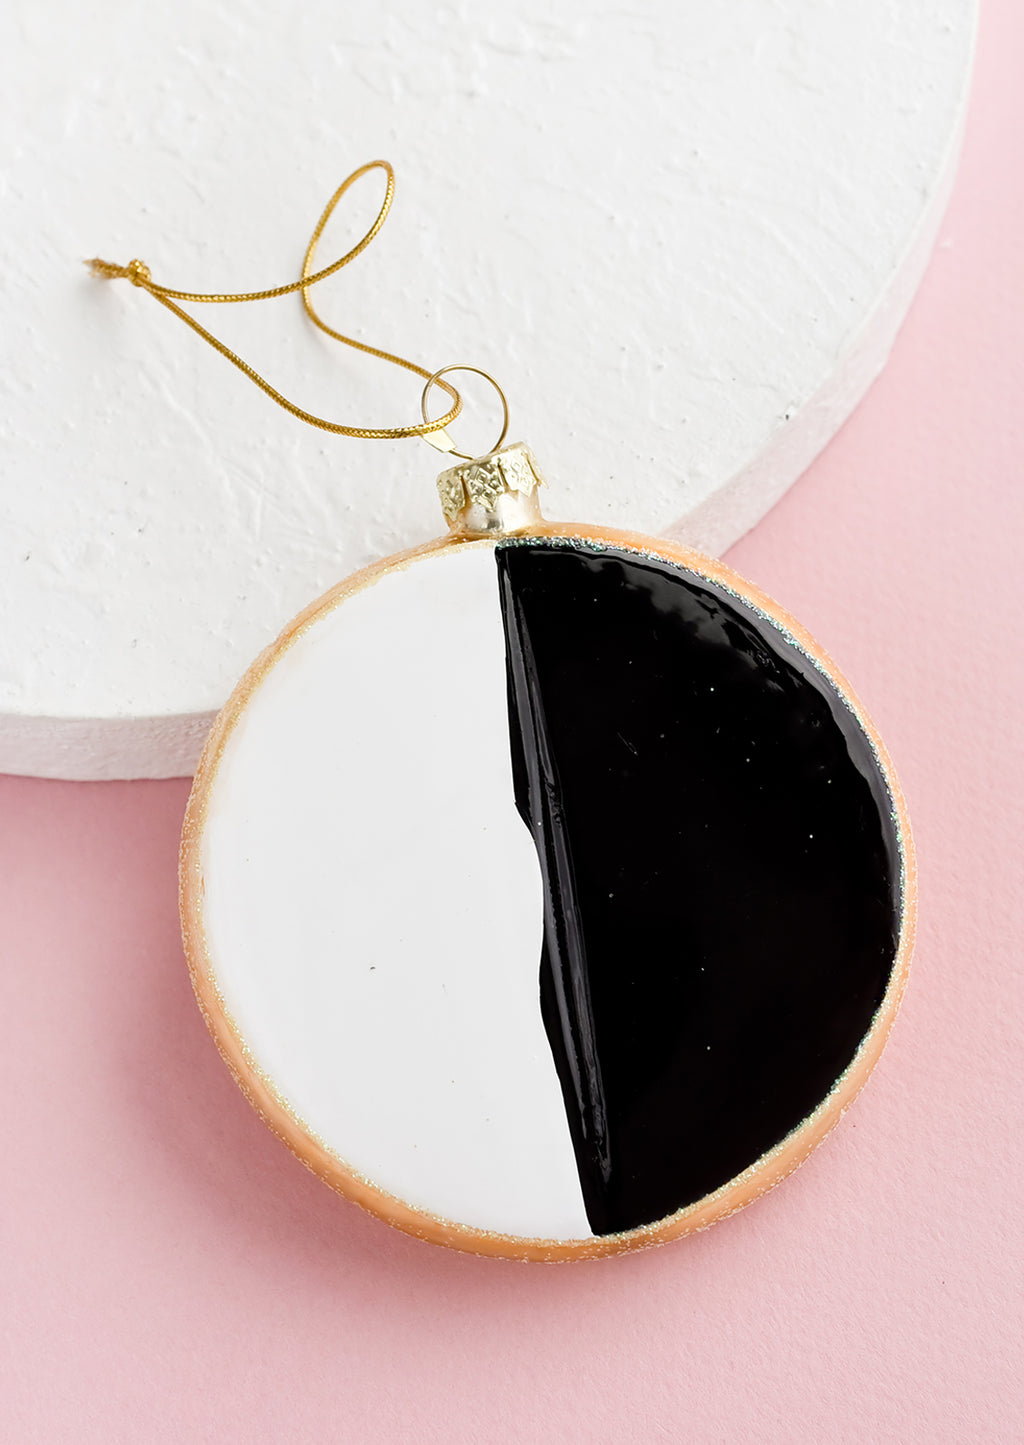 1: A decorative holiday ornament in the shape of a black & white cookie.